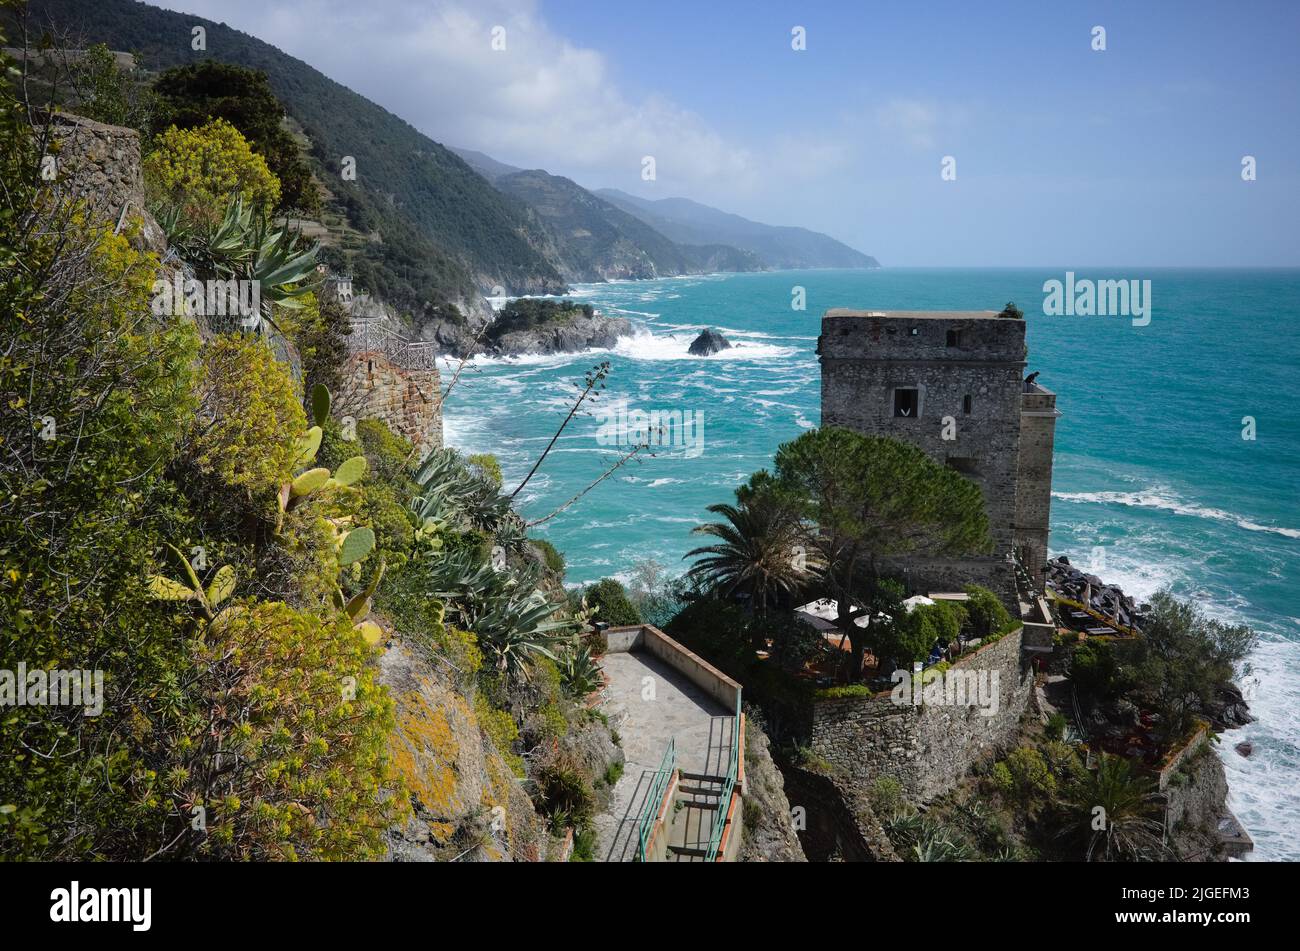 View of old stone fortress on cliff on Mediterranean sea Cinque Terre,  Riomaggiore, Liguria, Italy. Bay with bright azure water and layers of rocks Stock Photo